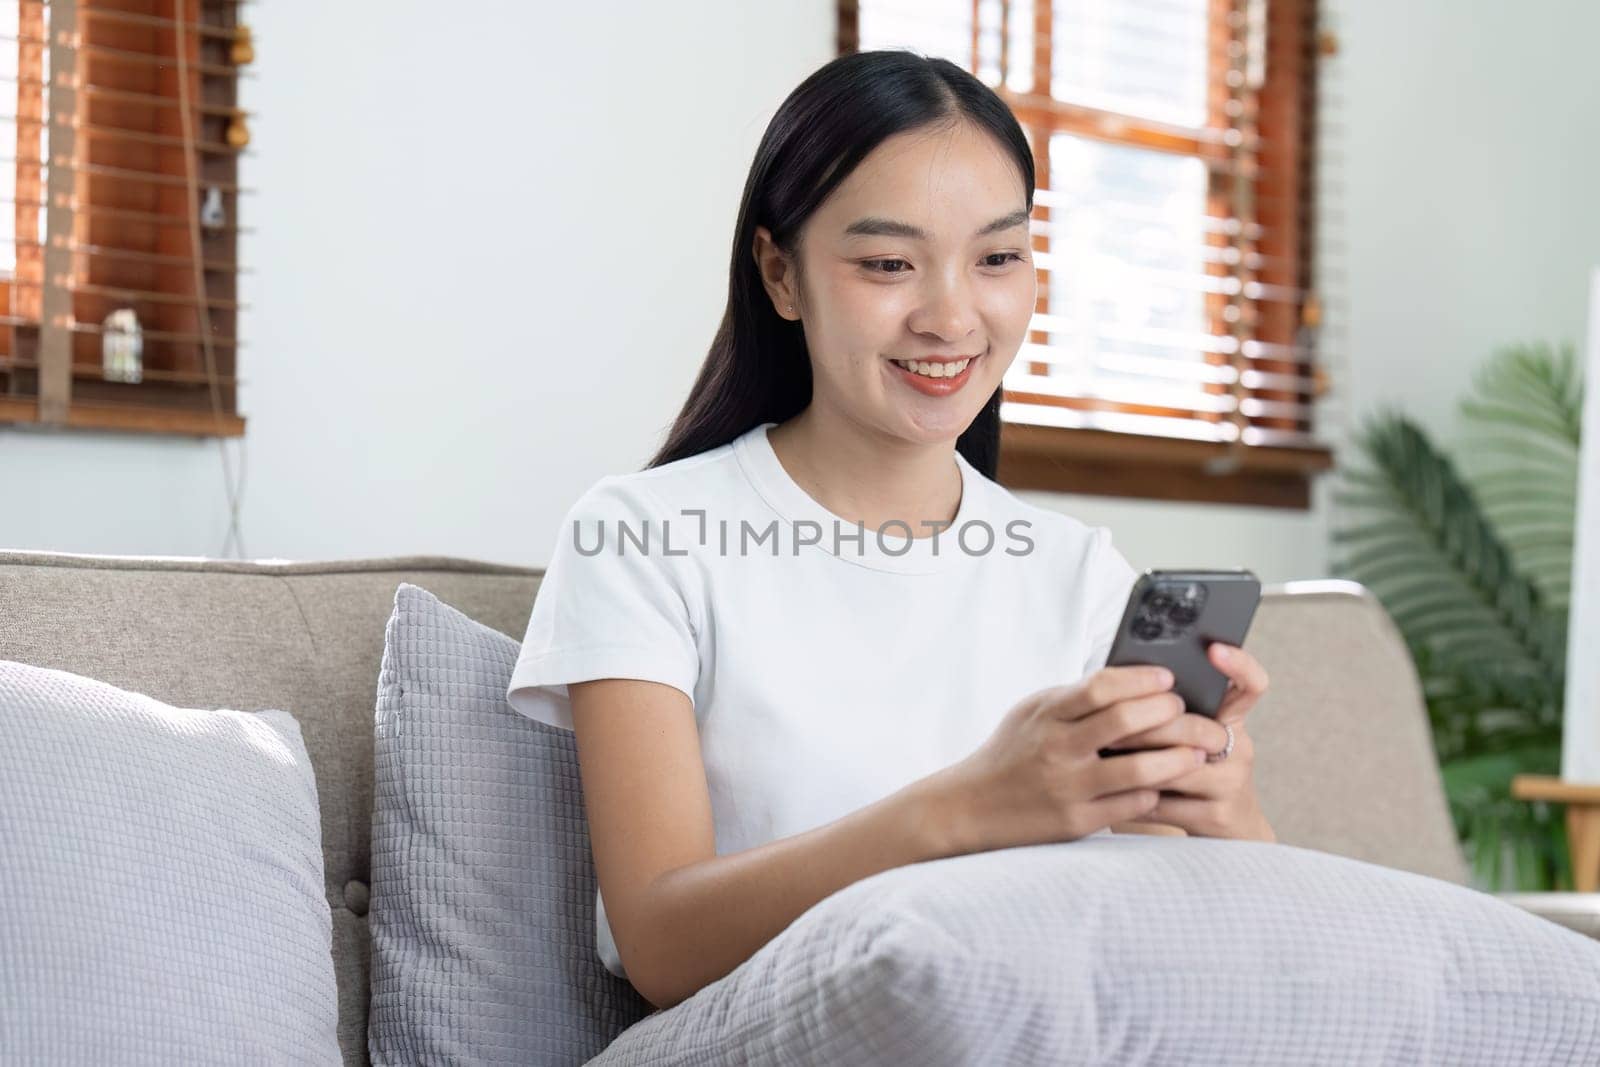 Happy young asian woman relax on comfortable couch at home texting messaging on smartphone, shopping online from home.